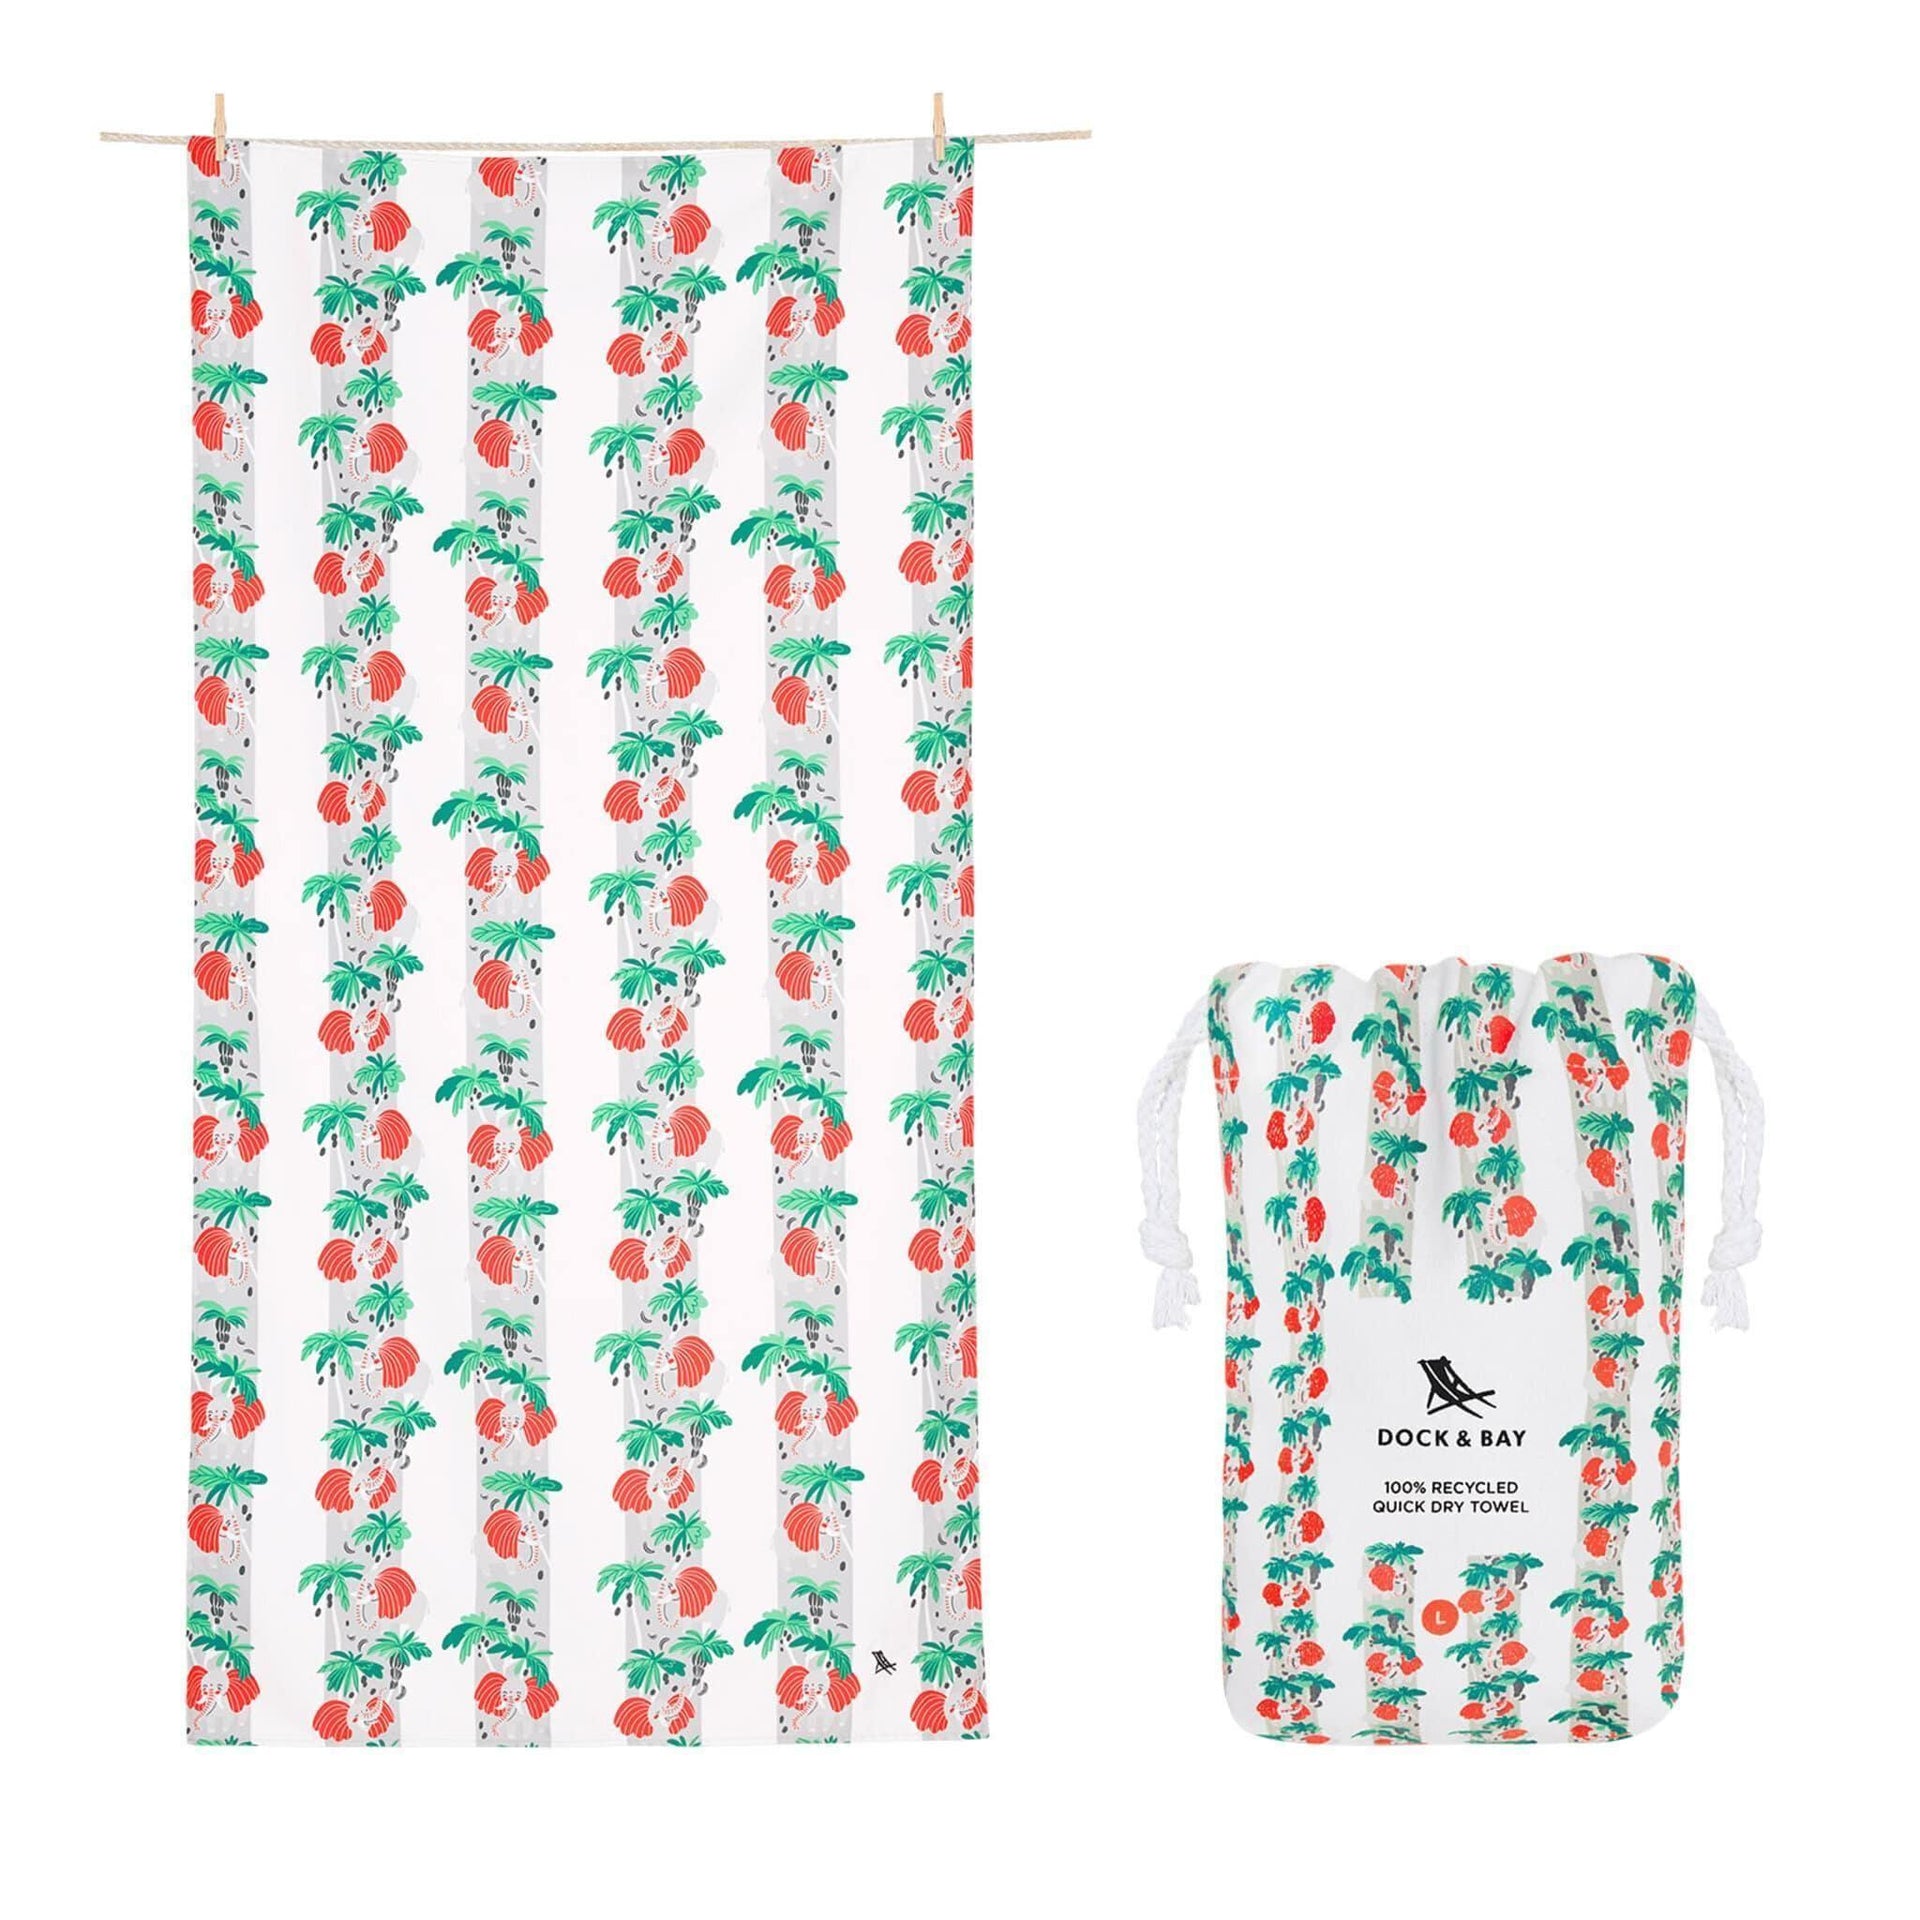 Dock & Bay | Beach Towel Jungle Collection L 100% Recycled - Upcycle Studio